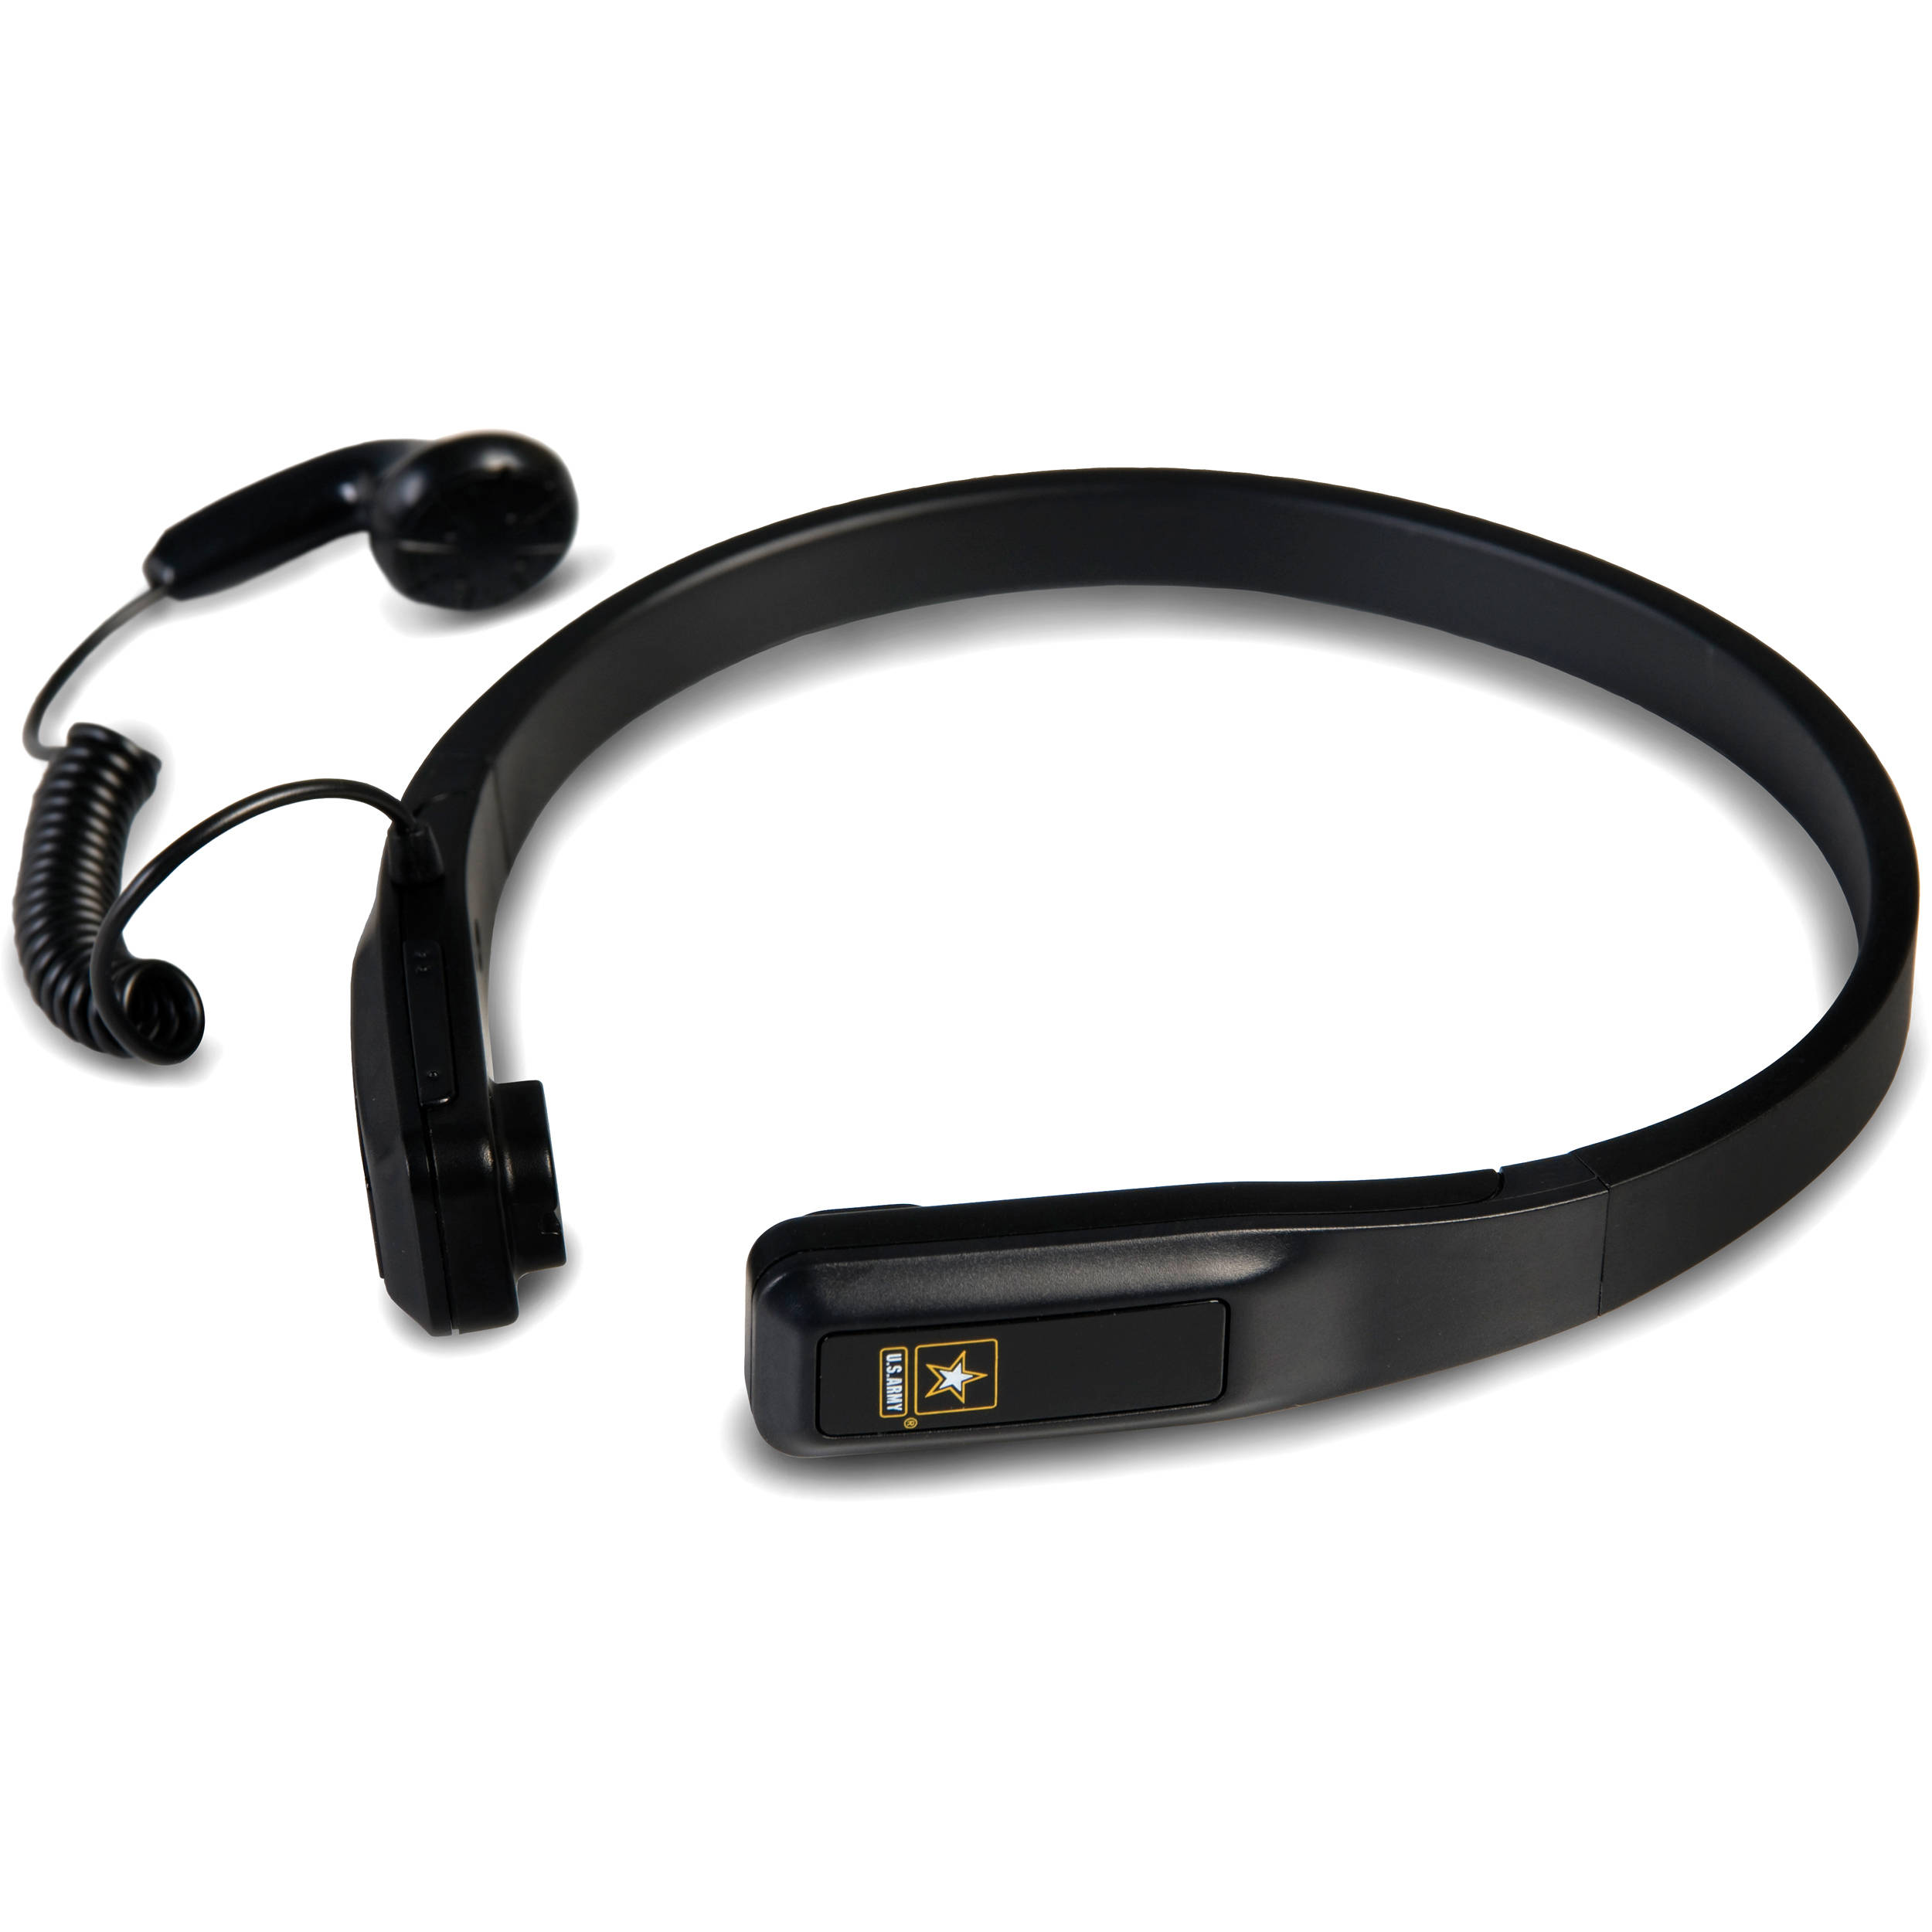 bluetooth microphone headset for pc